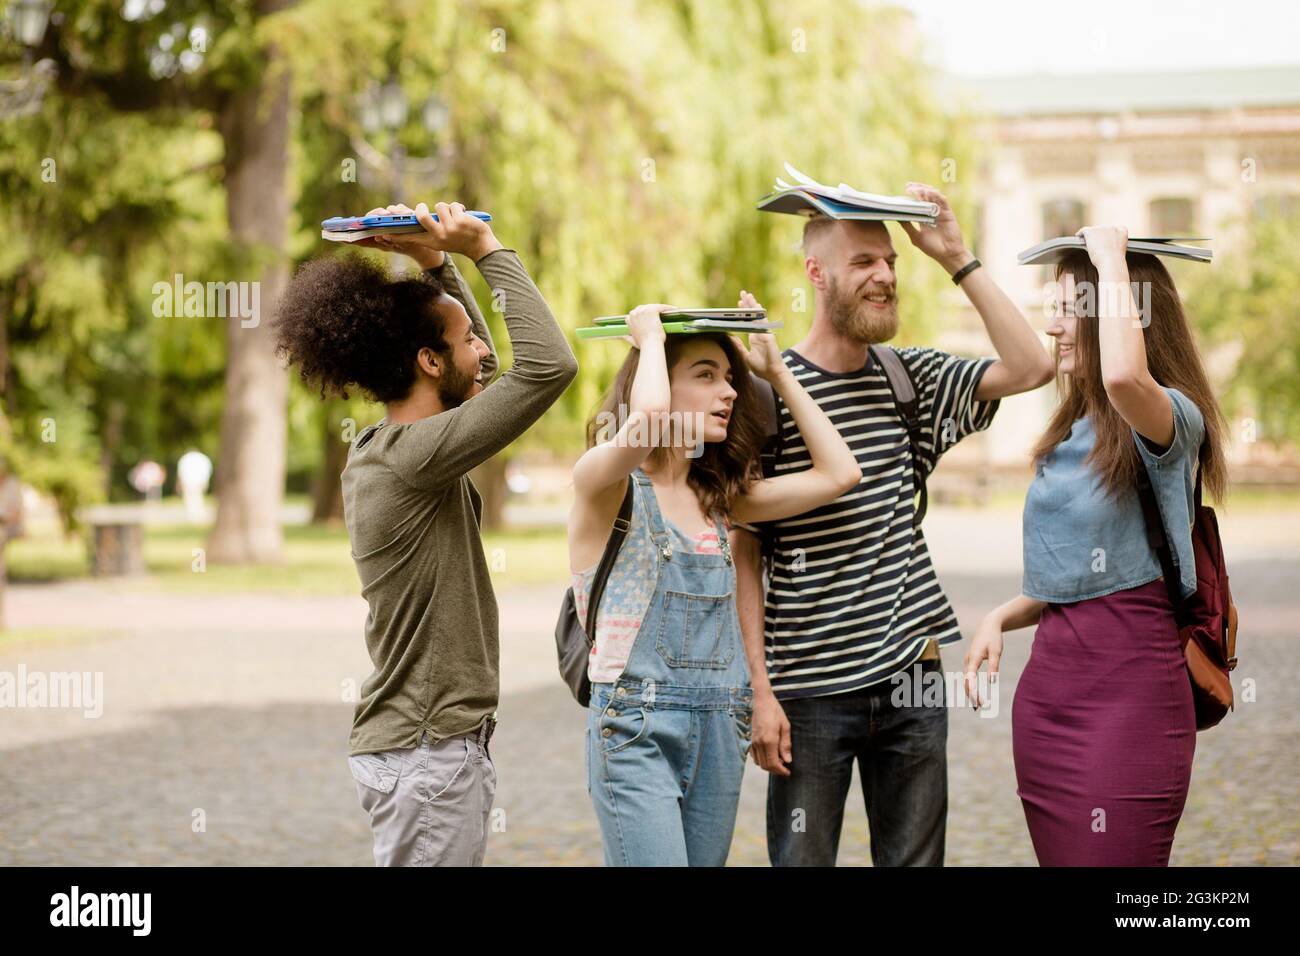 Young students fooling around in university campus. Stock Photo